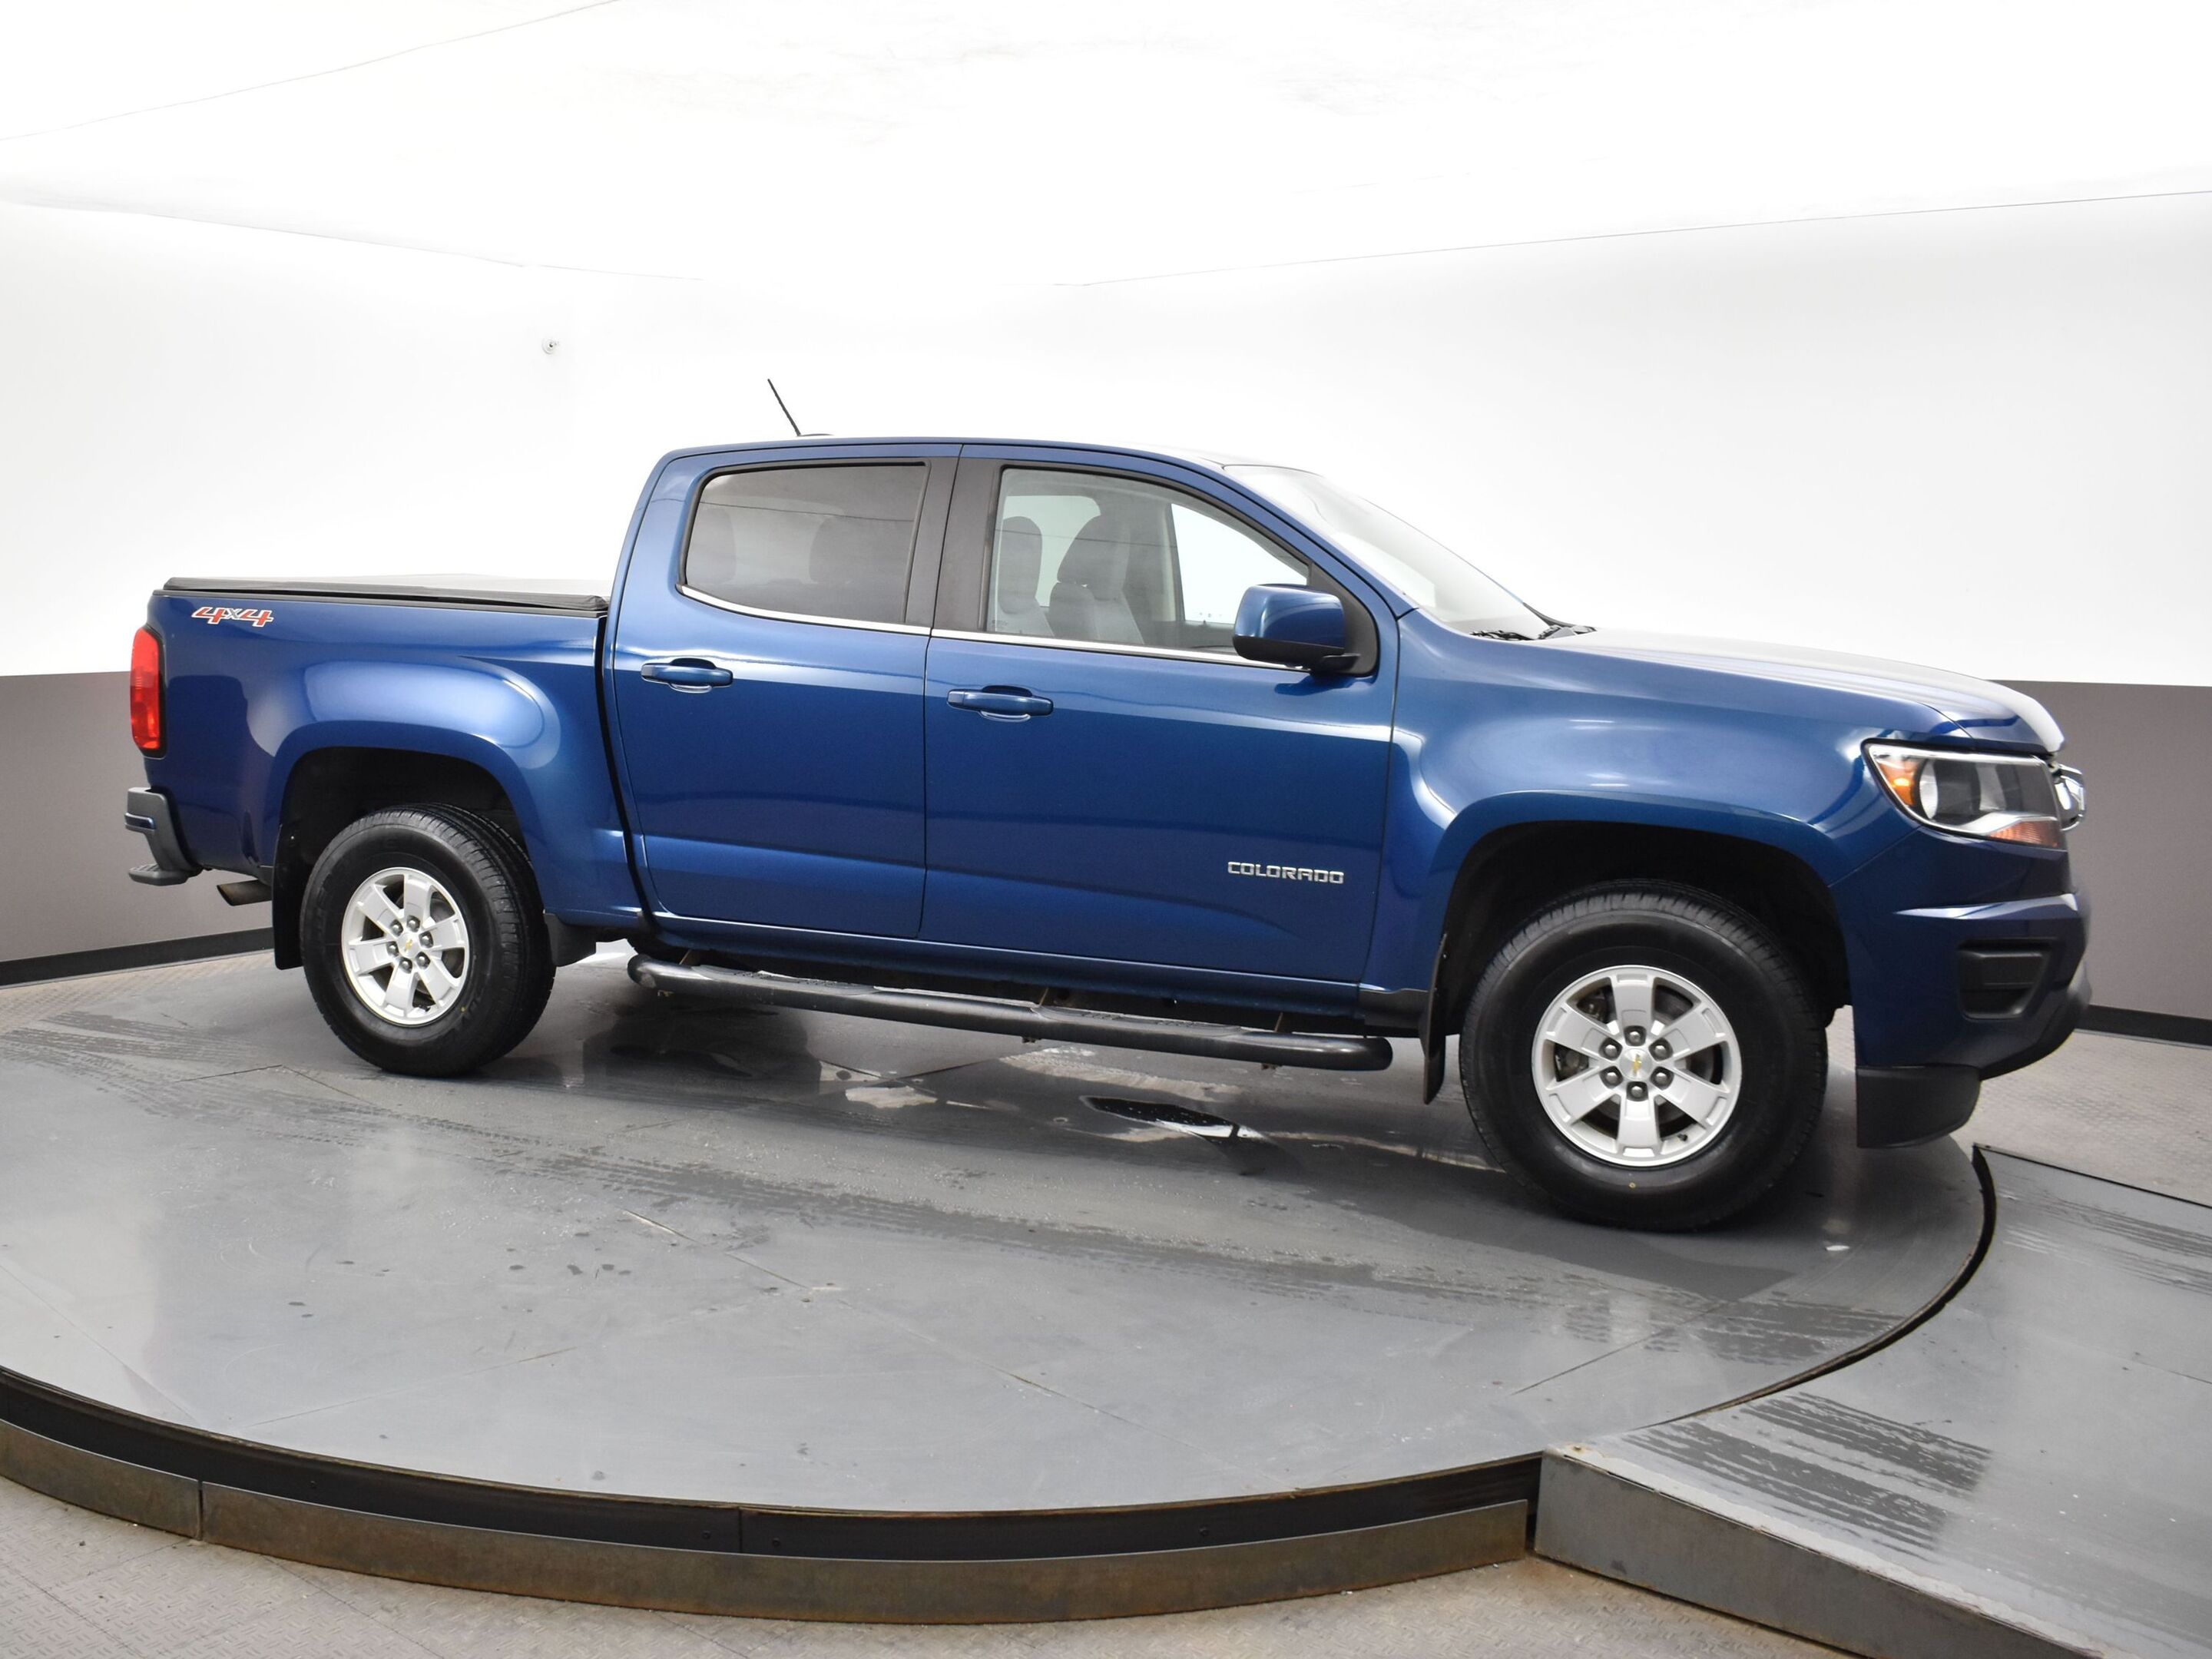 2019 Chevrolet Colorado V6 4X4 - Call 902-453-2790 to book an appointment 